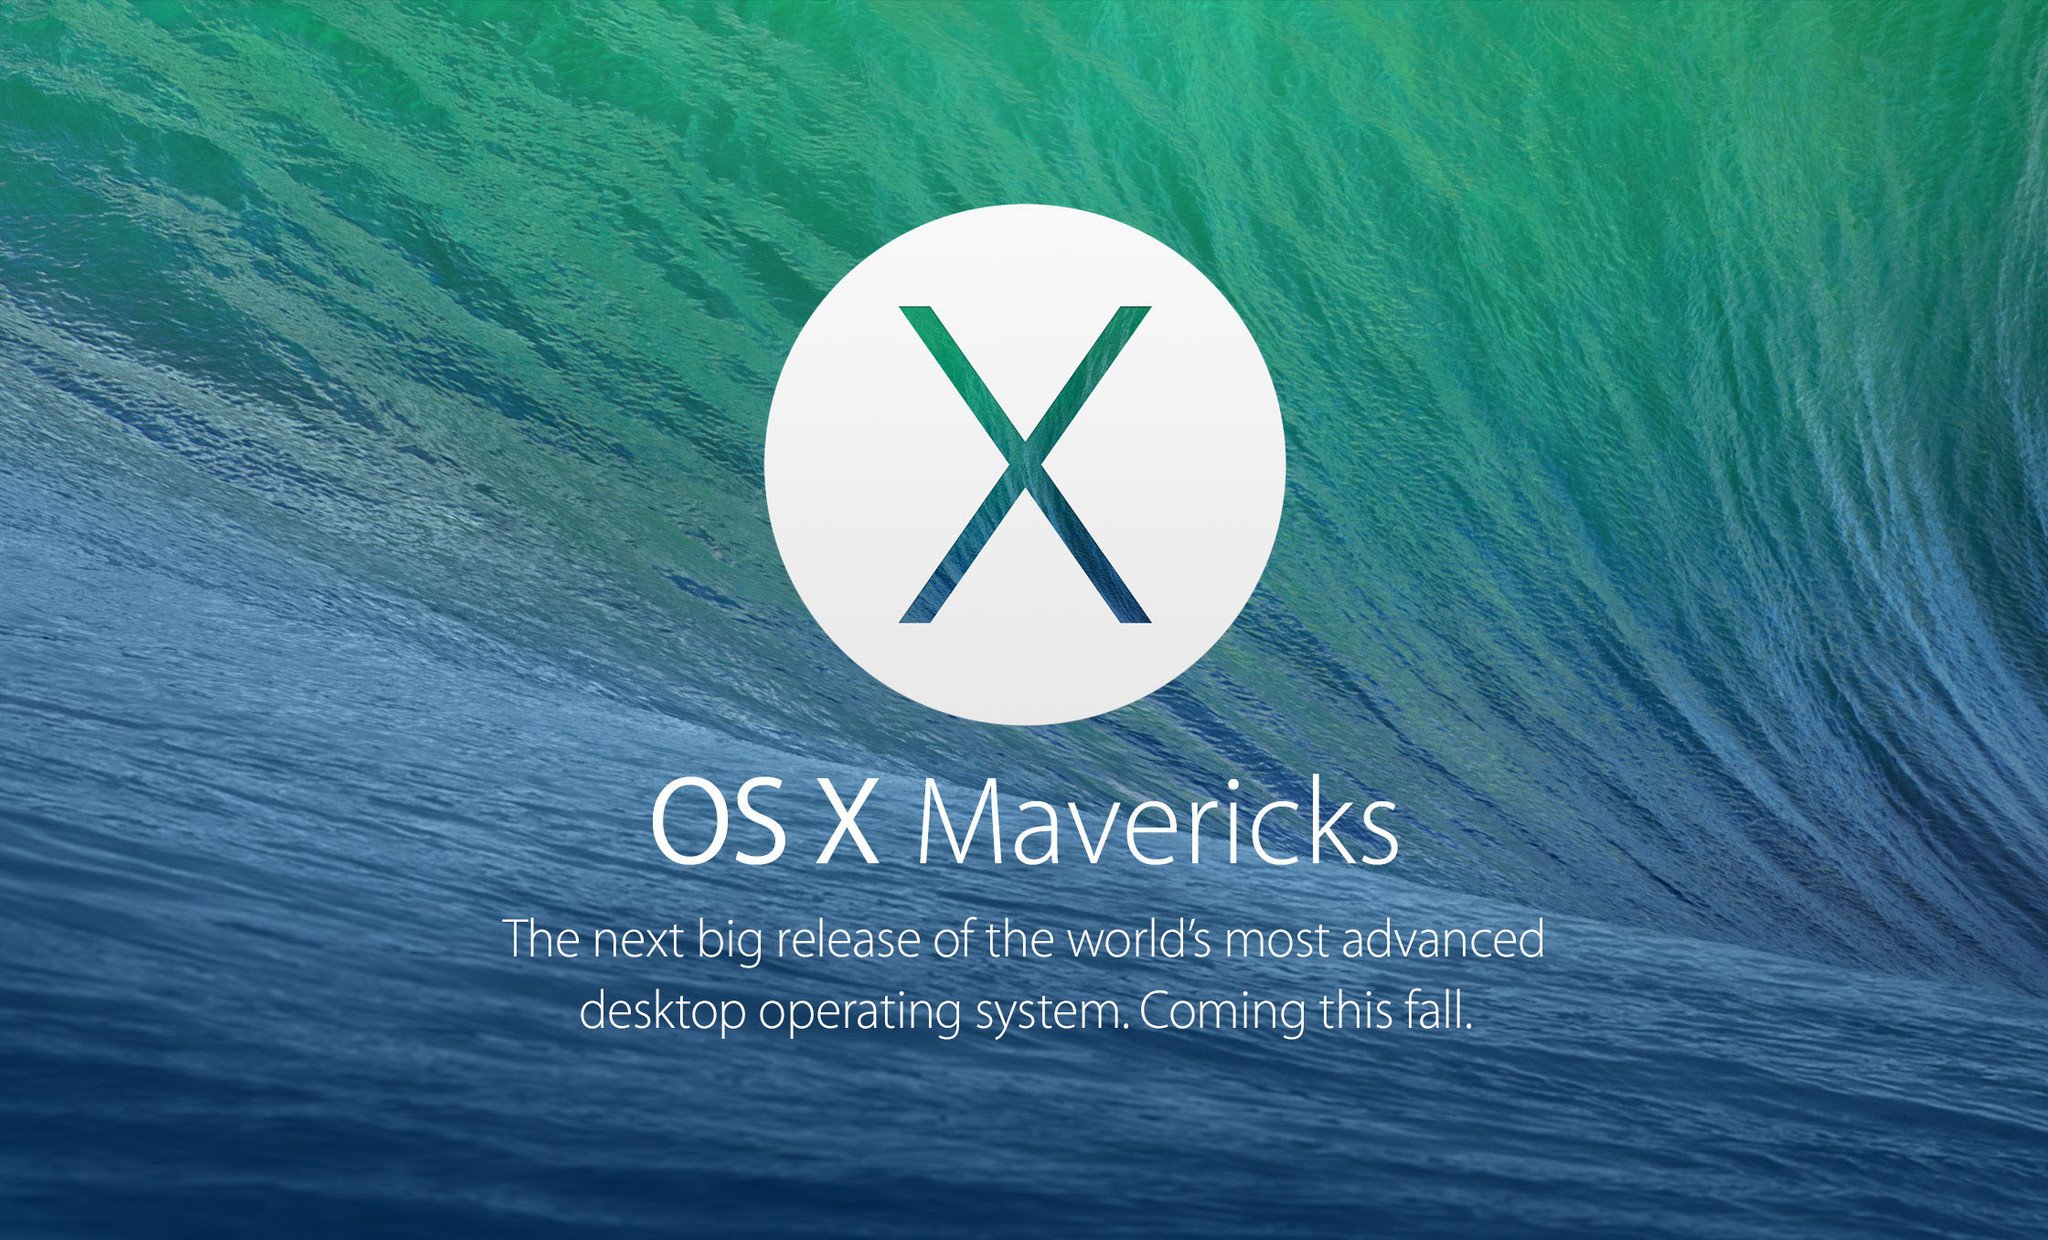 Mavericks adds new AppleScript and Automator functions